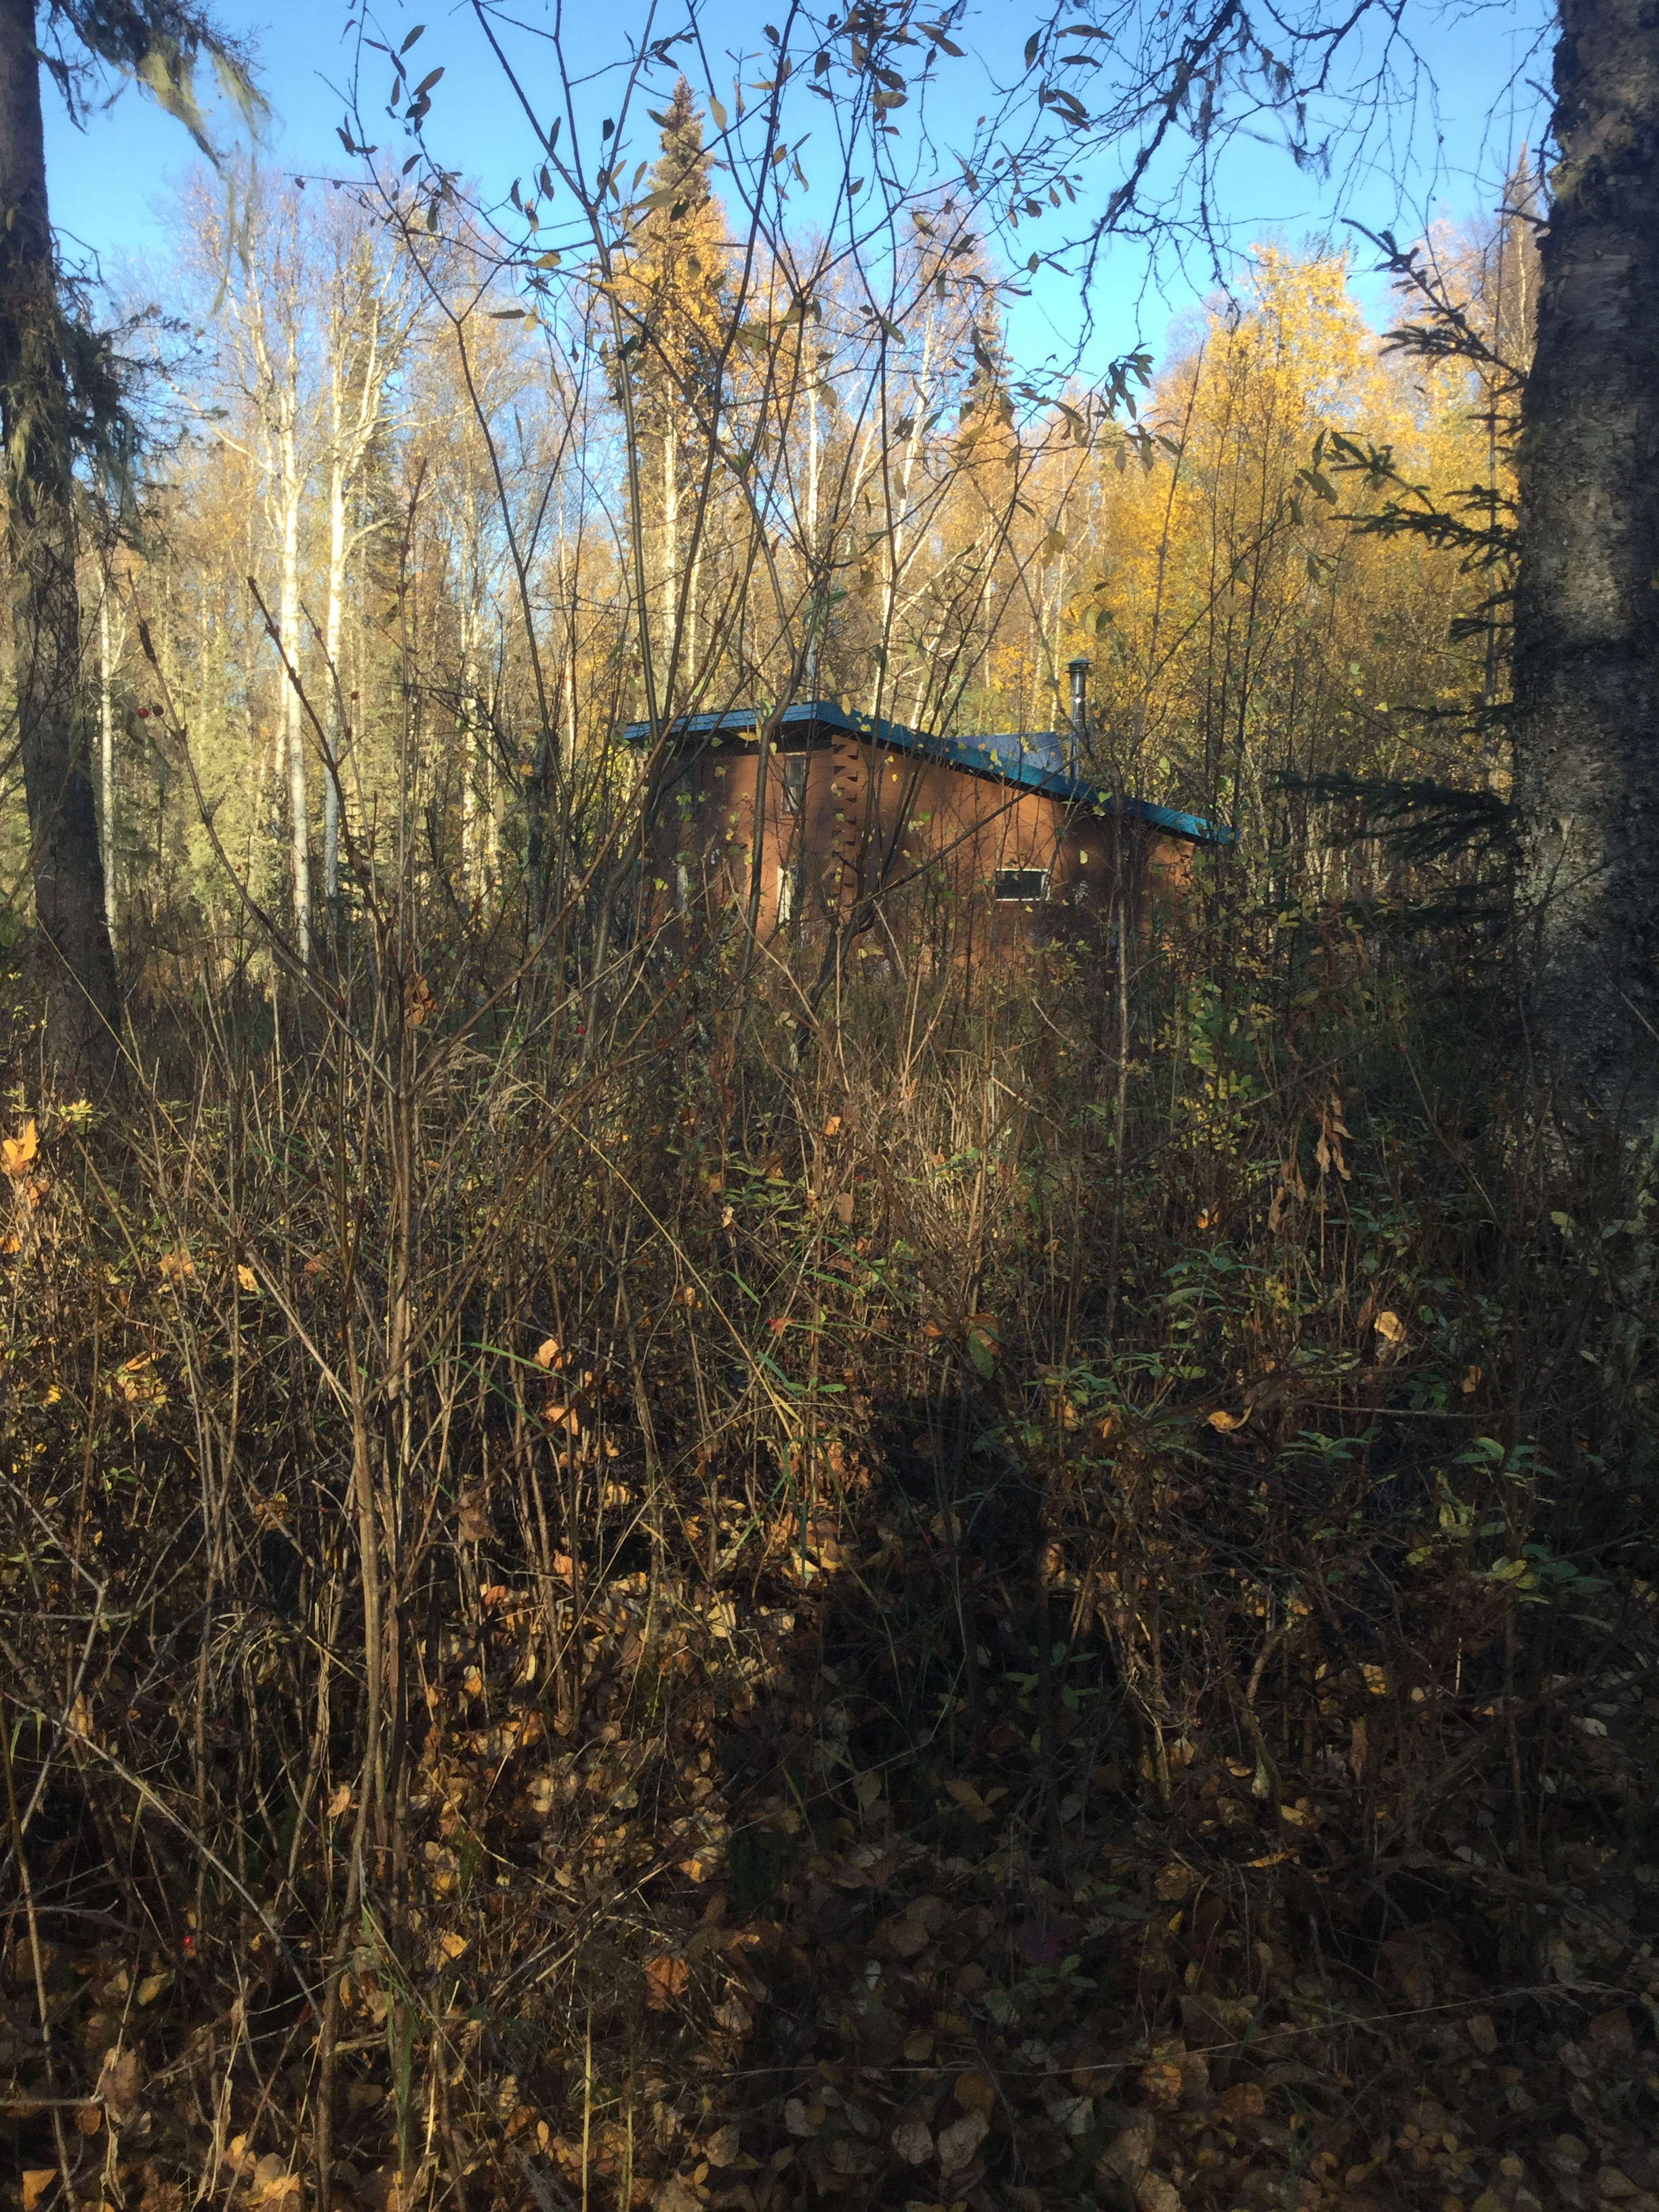 This is Talkeetna Jo’s Dry Cabin, late Summer.